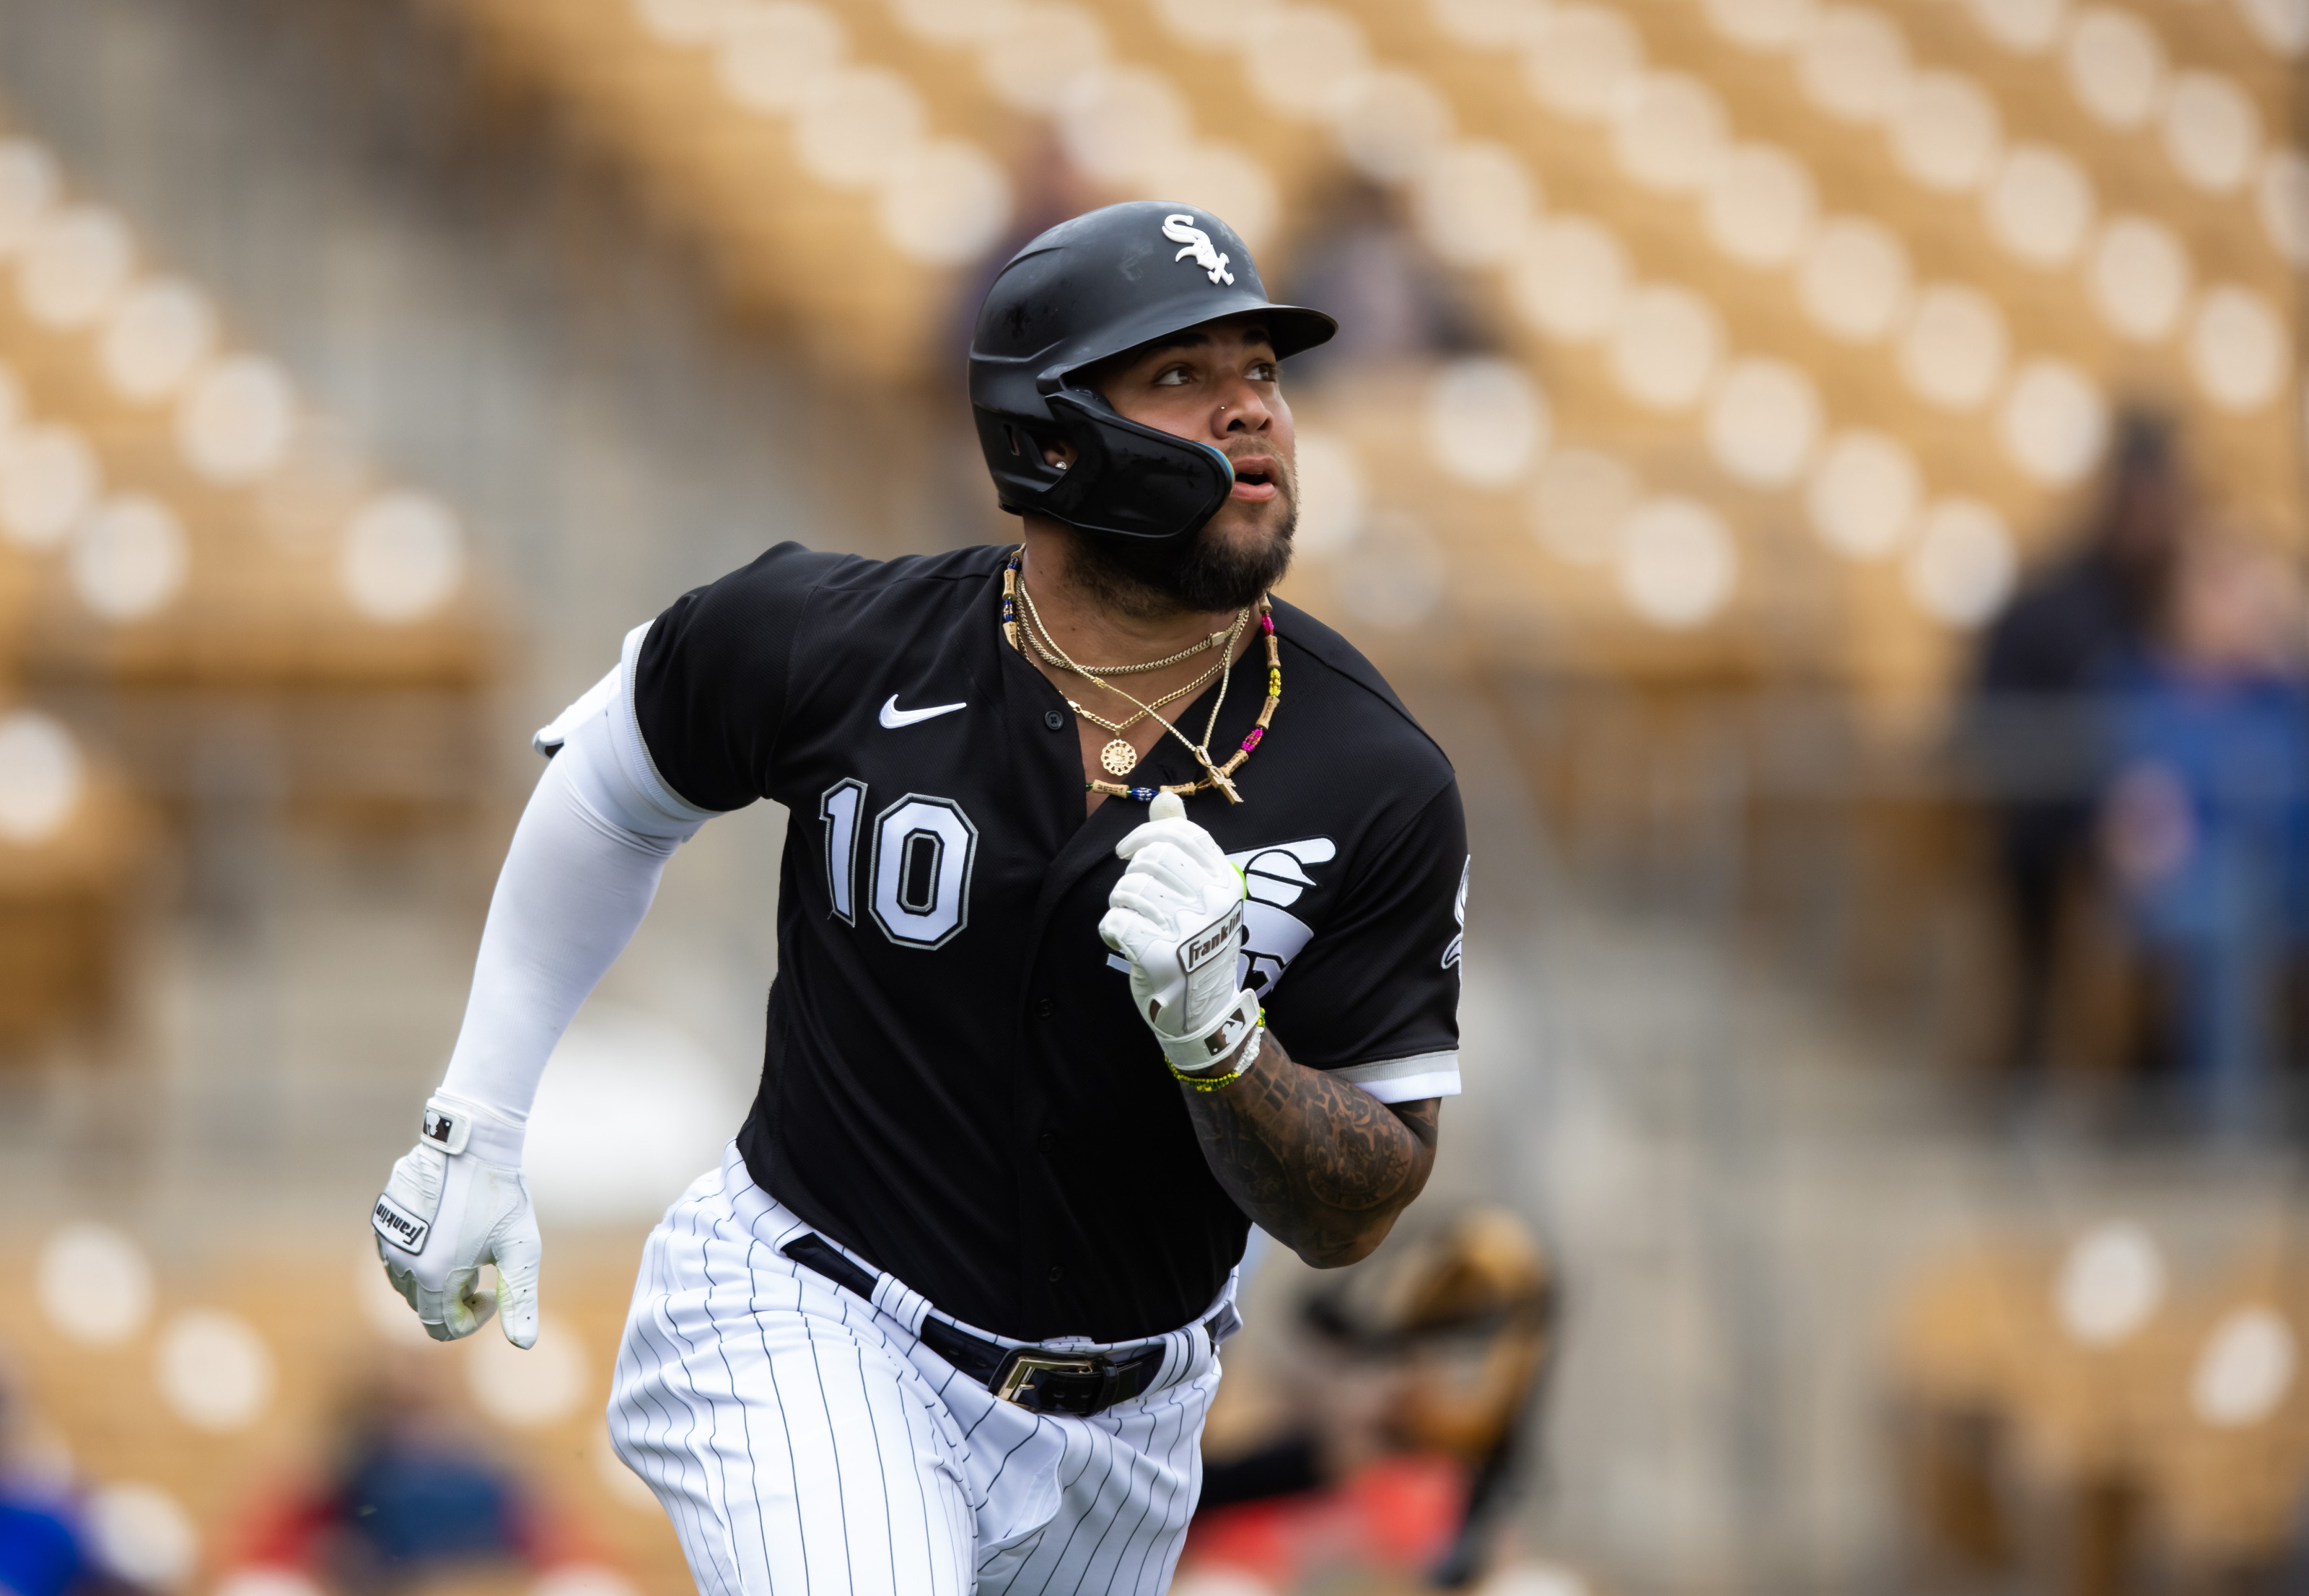 White Sox injury update: Yoan Moncada dealing with back issue